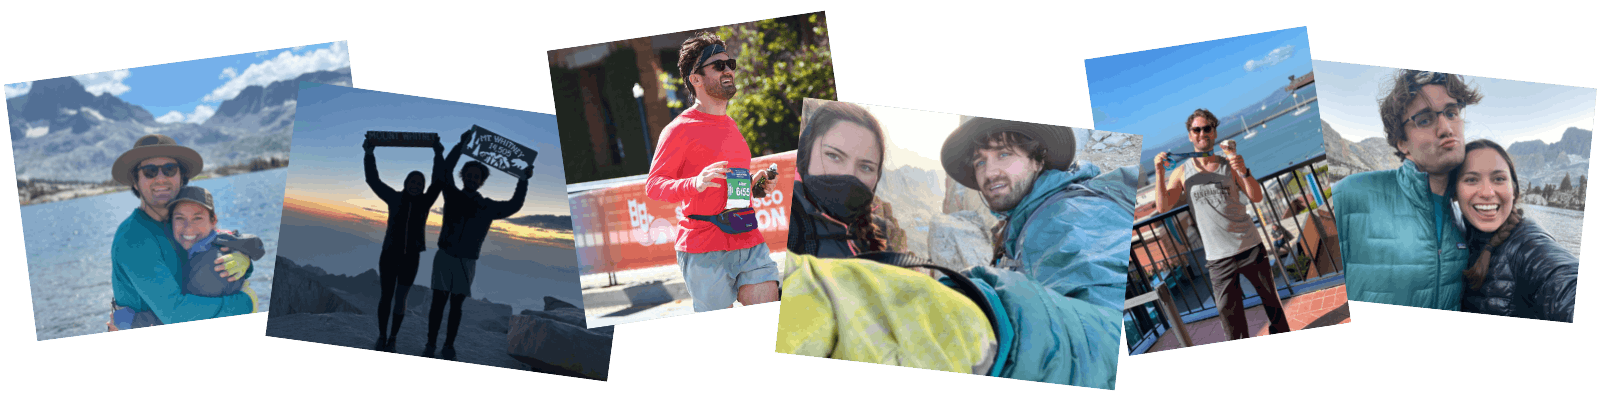 Quick montage of photos with Bekah from the JMT, and some photos from the San Francisco Marathon